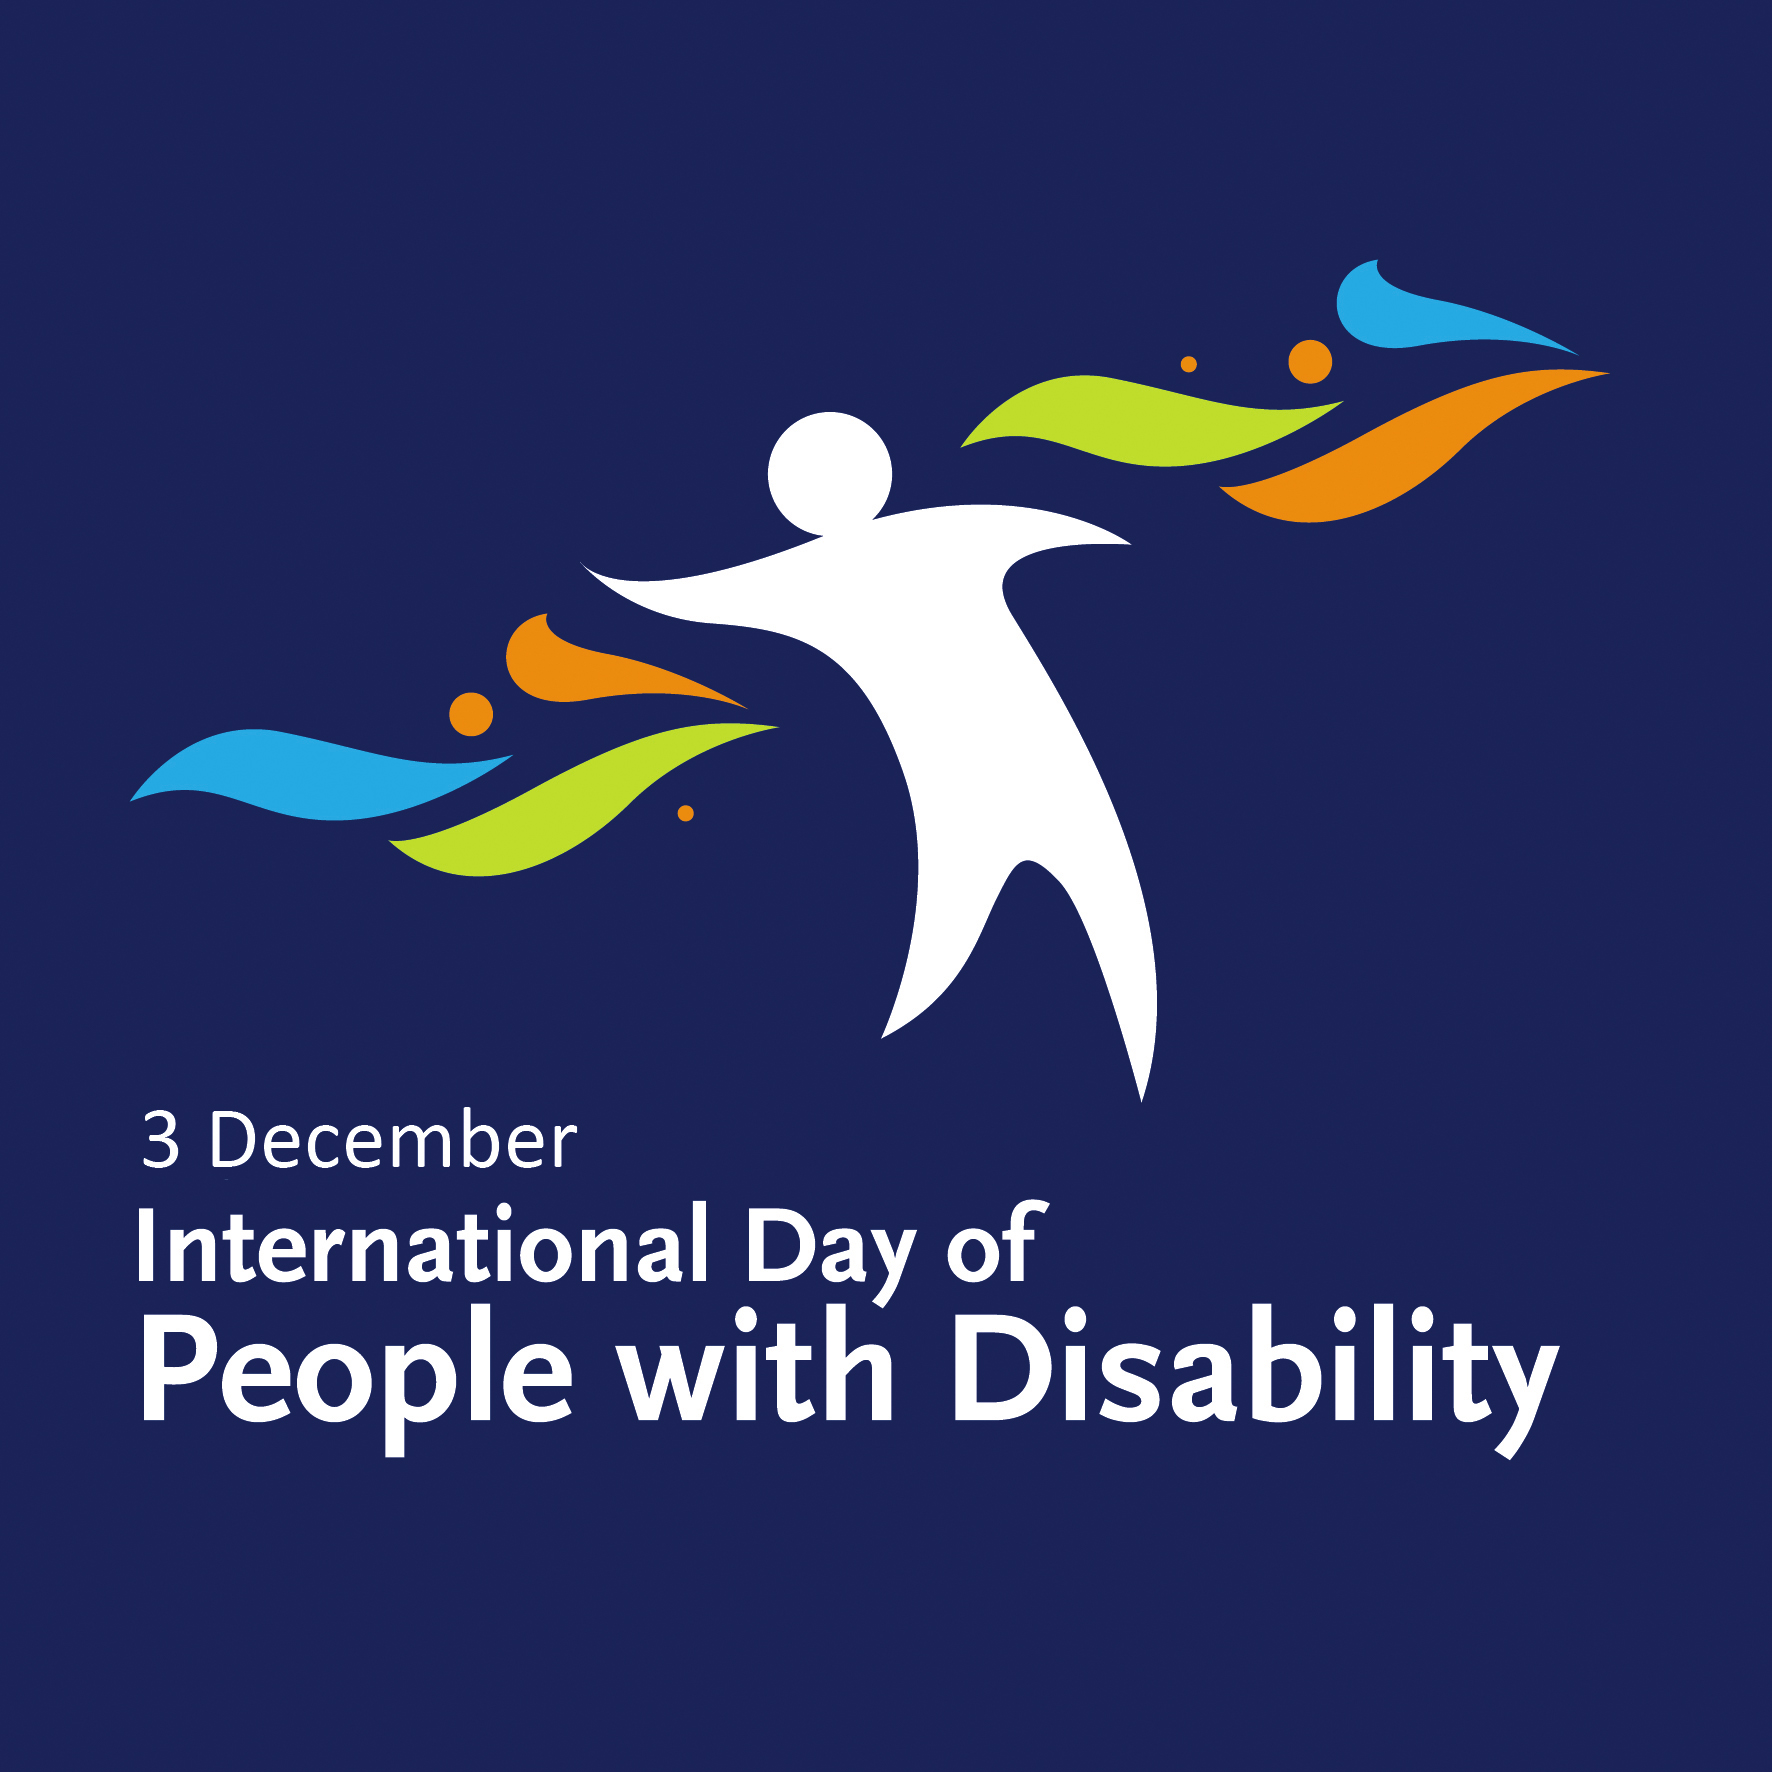 Dec. 3rd is International Day of Persons with Disabilities